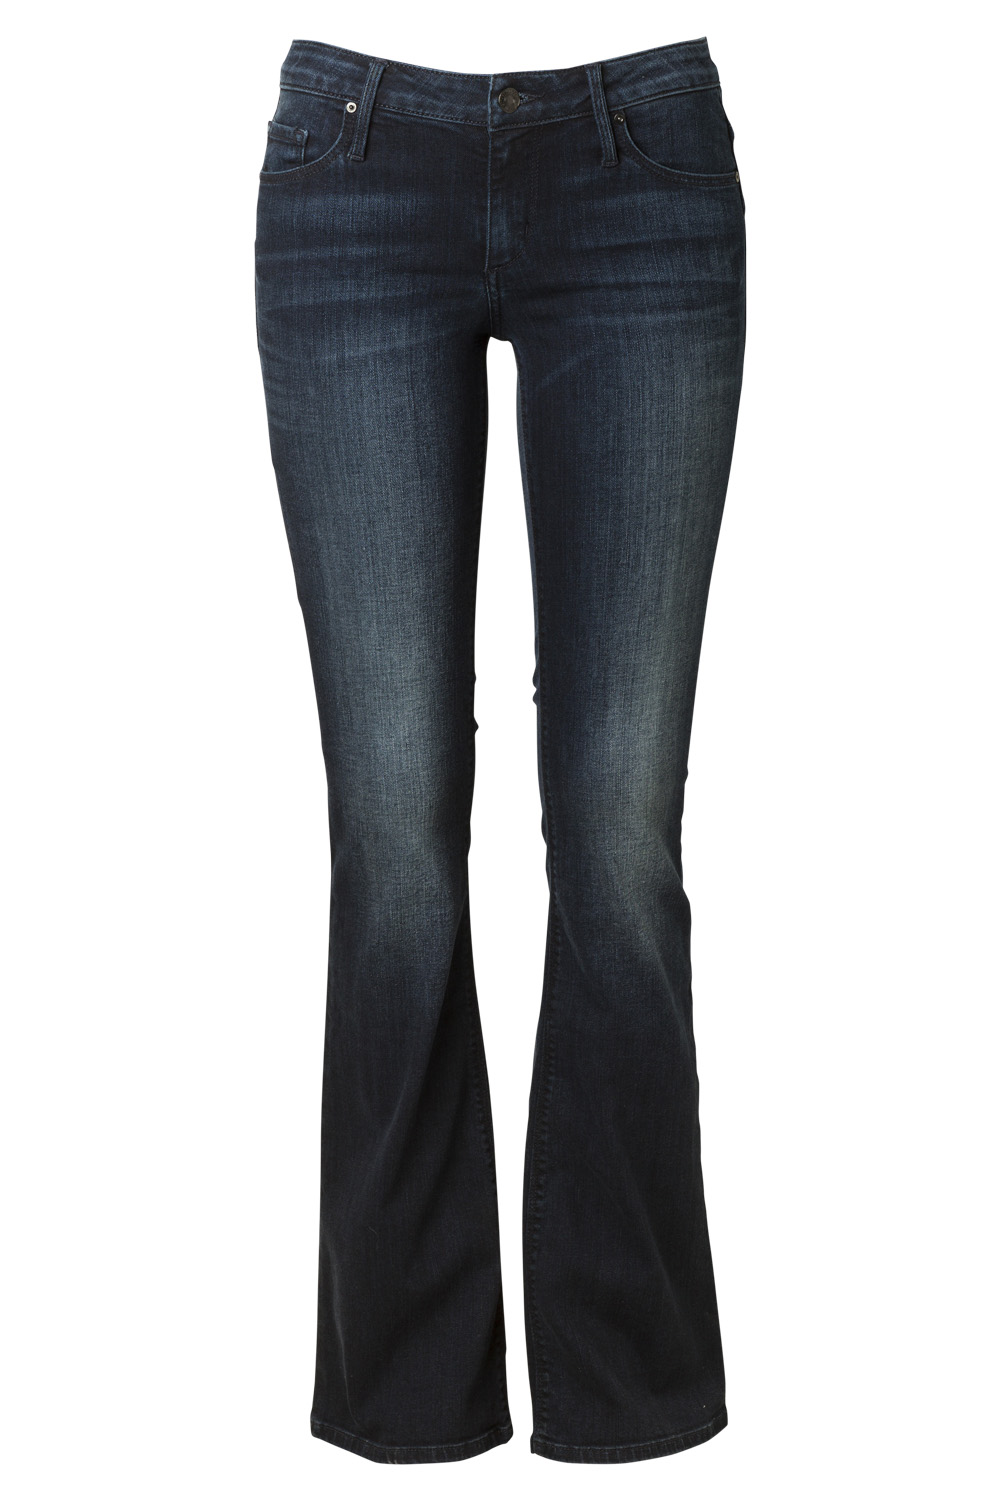 Jeans, $389, by Black Orchid.